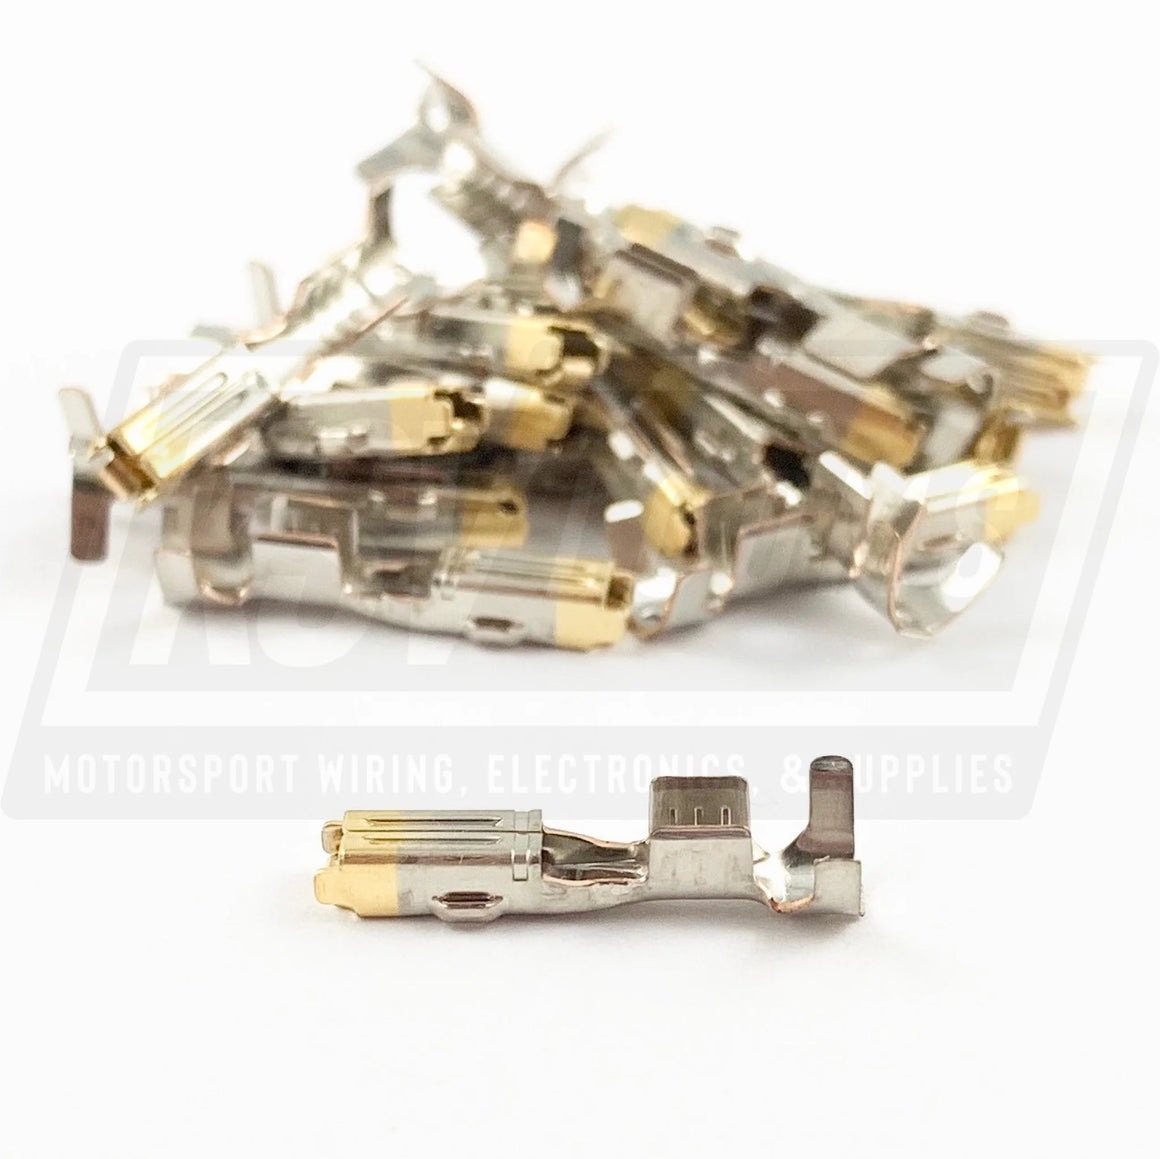 Socket Terminal (Gold) For M&W Cdi Ignition Pro-10 Pro-12 Pro-14 And Pro-Drag (20-16 Awg)